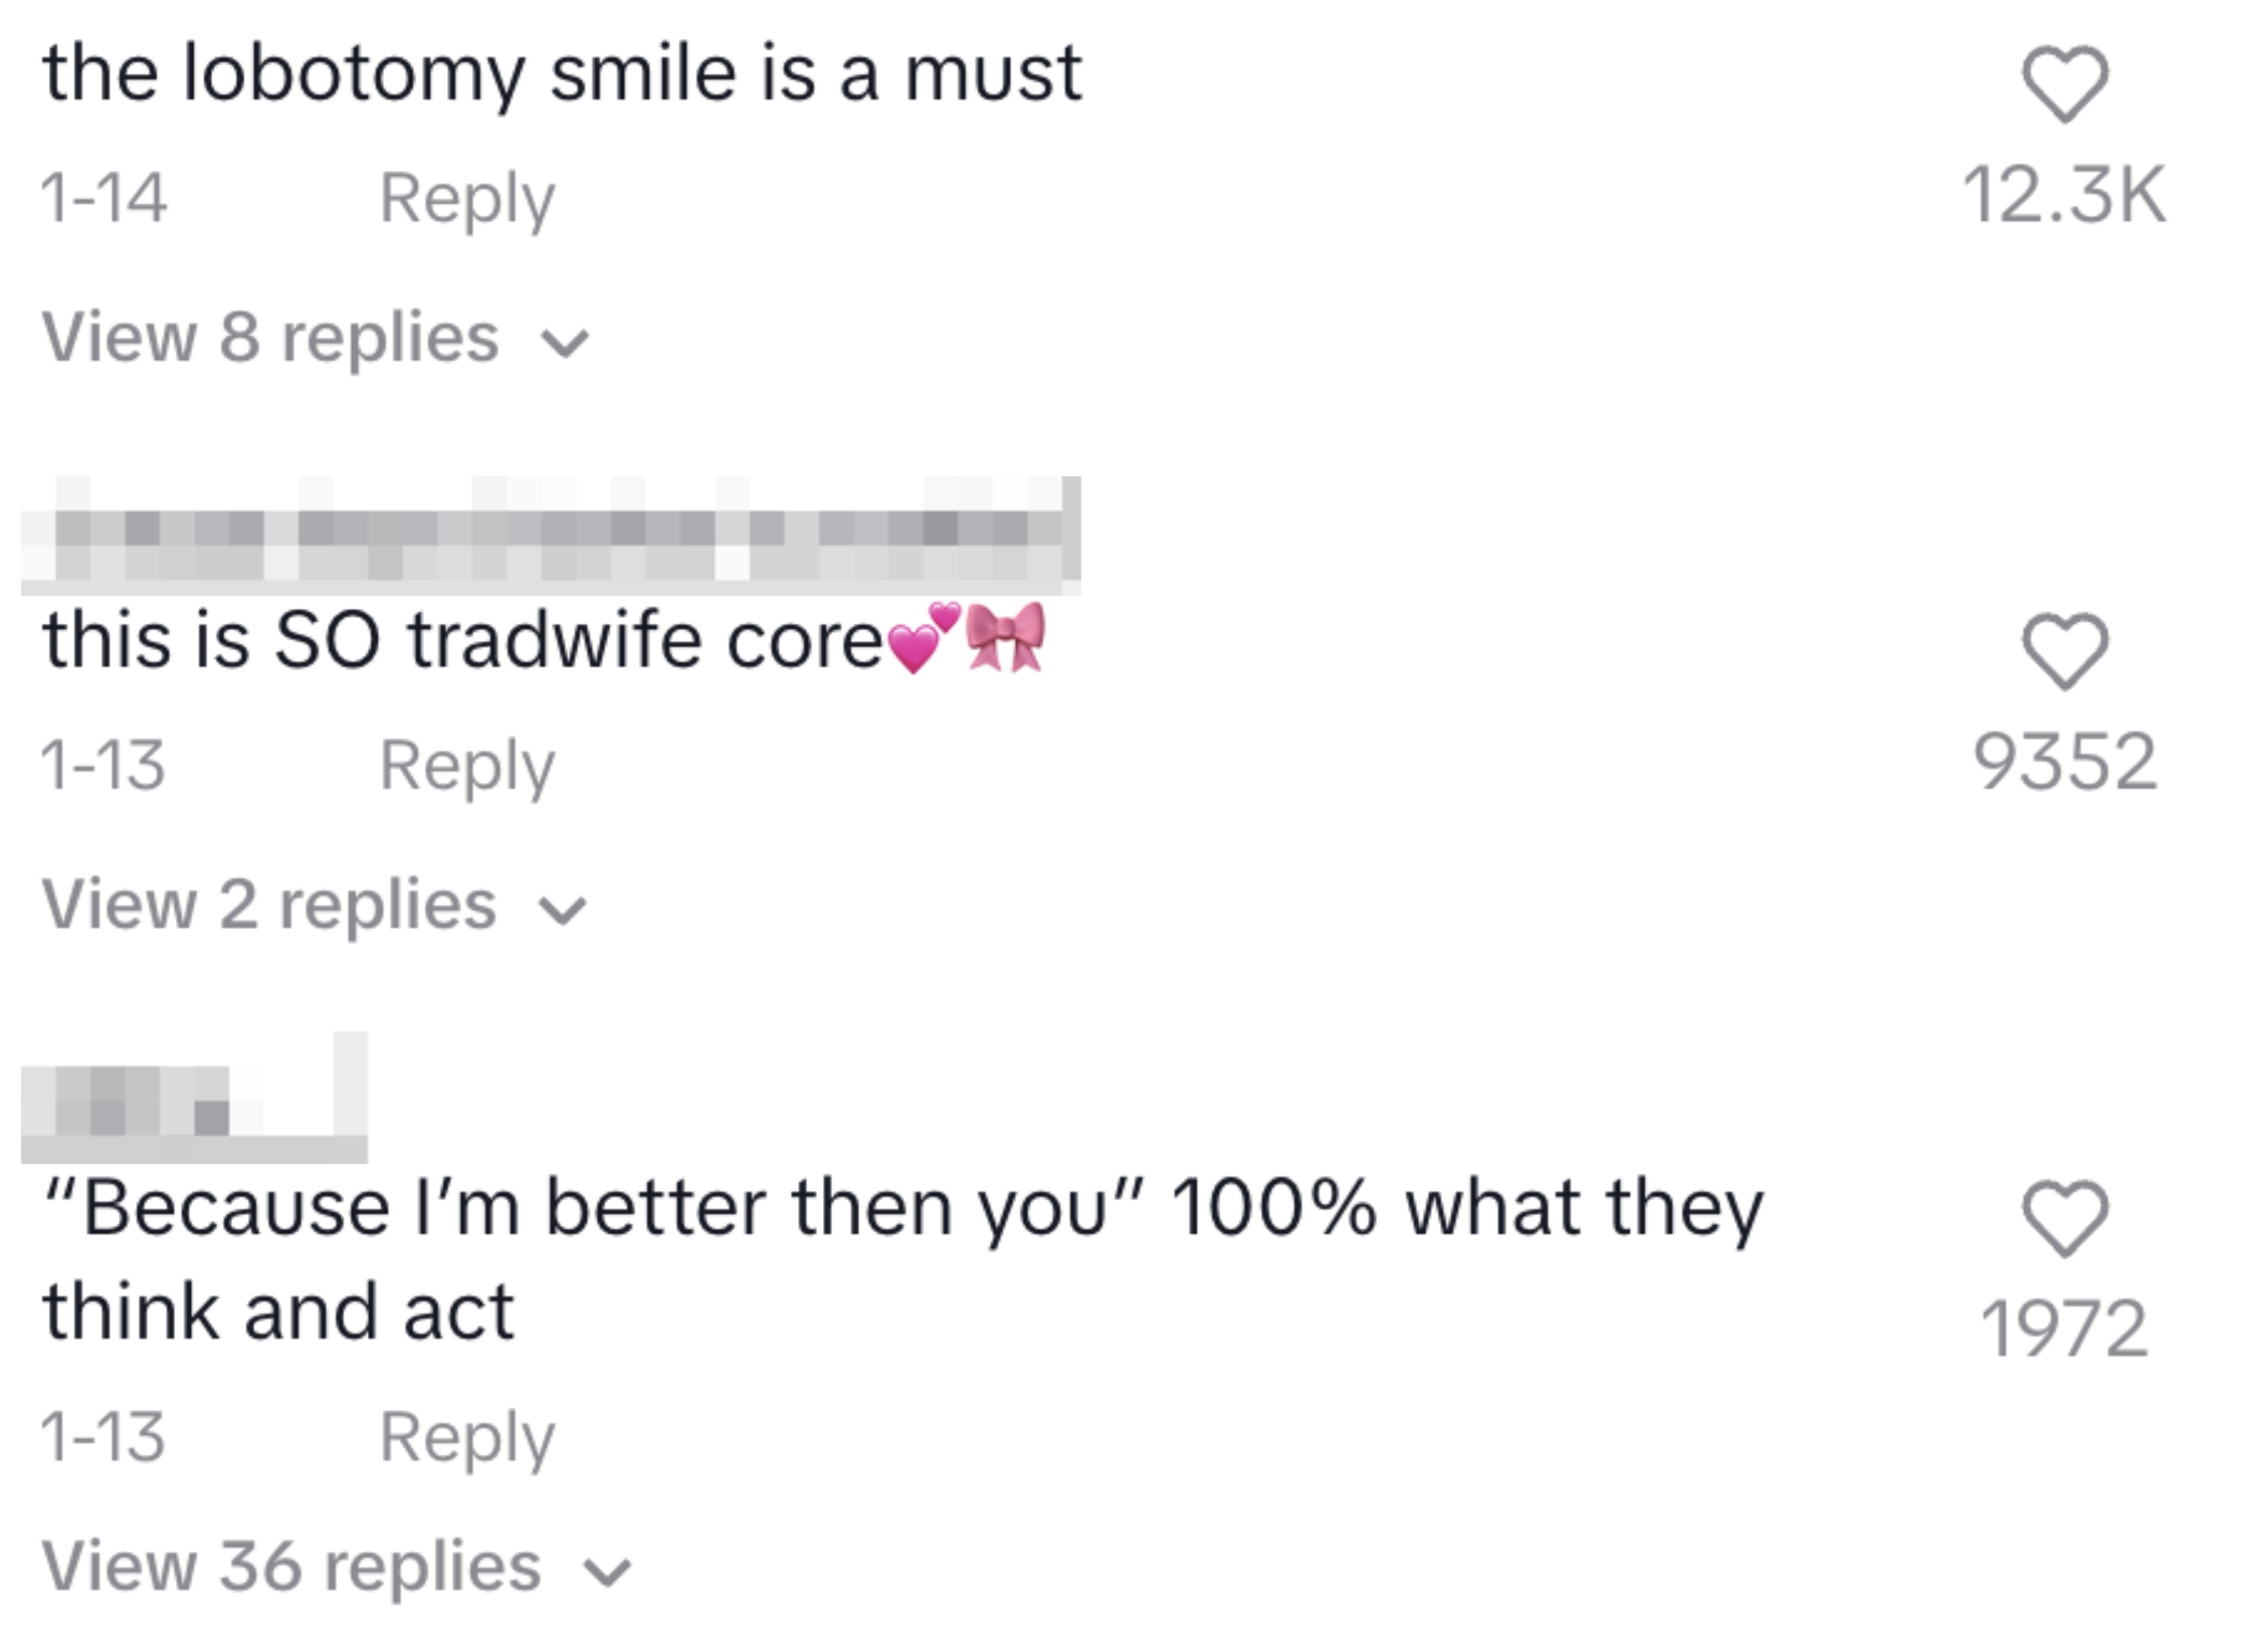 &quot;the lobotomy smile is a must,&quot; &quot;this is SO tradwife core,&quot; and &quot;&#x27;Because I&#x27;m better than you&#x27; 100% what they think and act&quot;